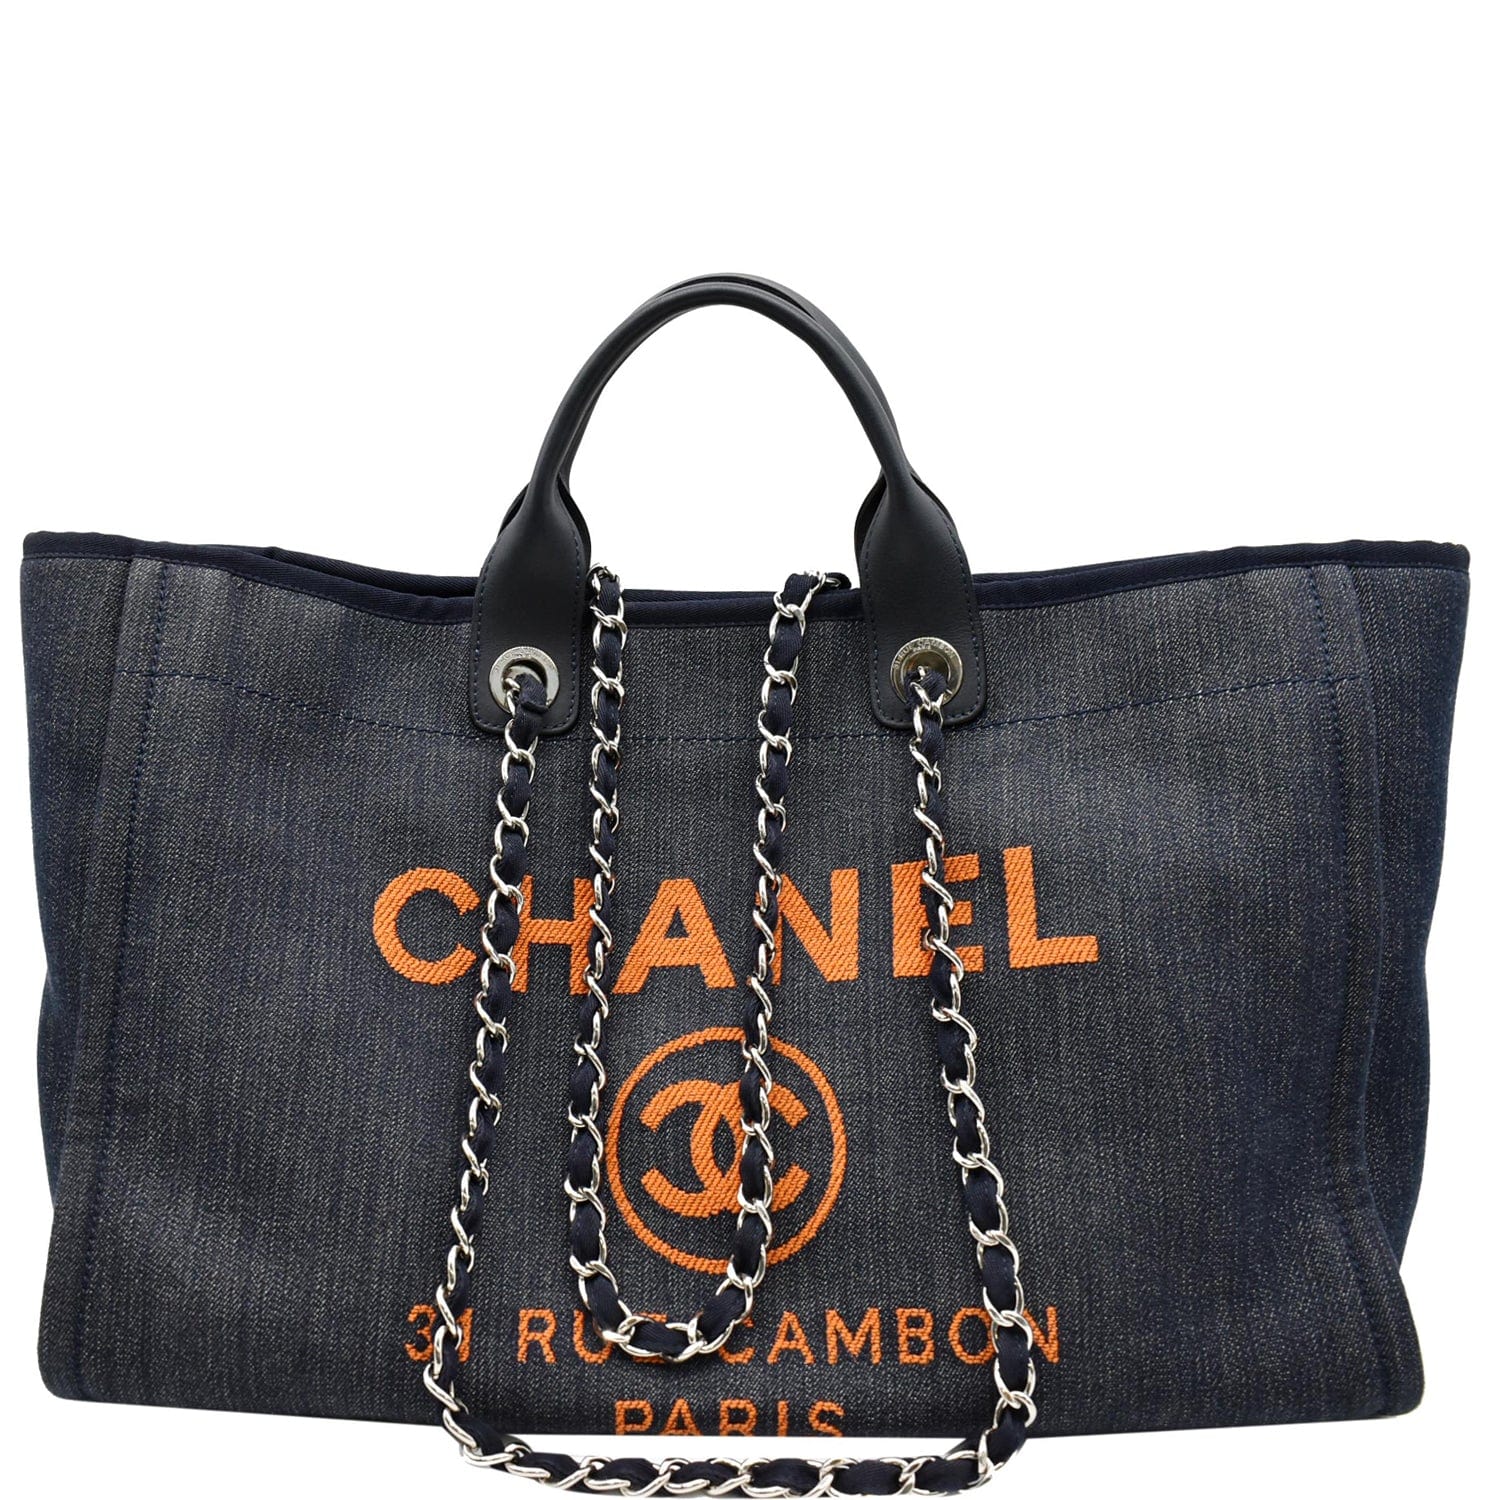 Chanel Grey Canvas Large Deauville Shopping Tote